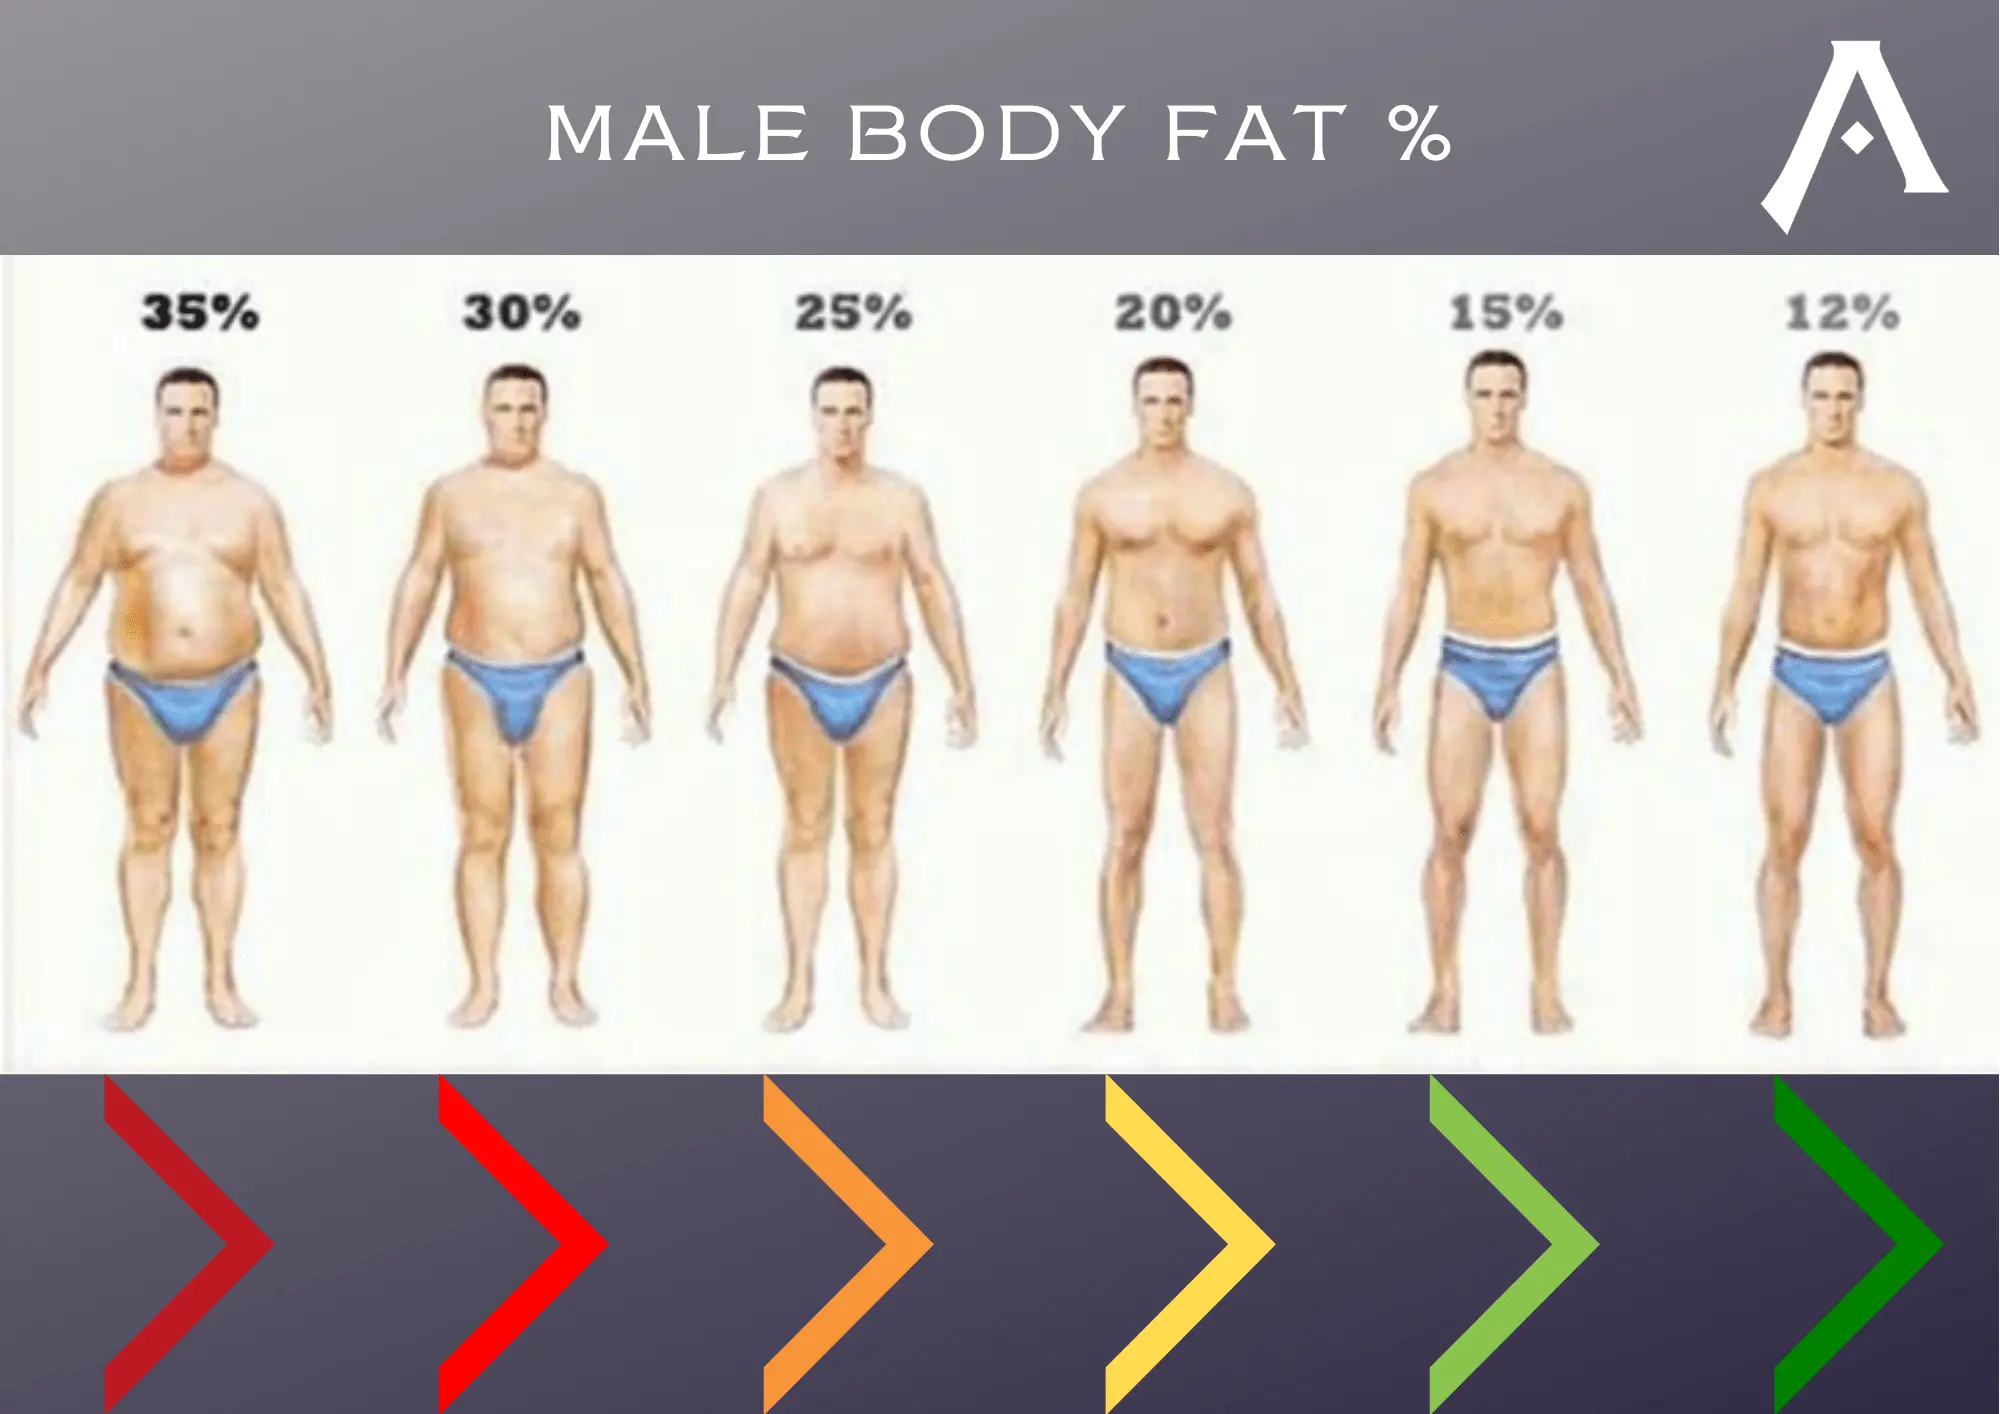 Clearance Gem MALE BODY FAT % - Andy Jamieson PT, body fat 